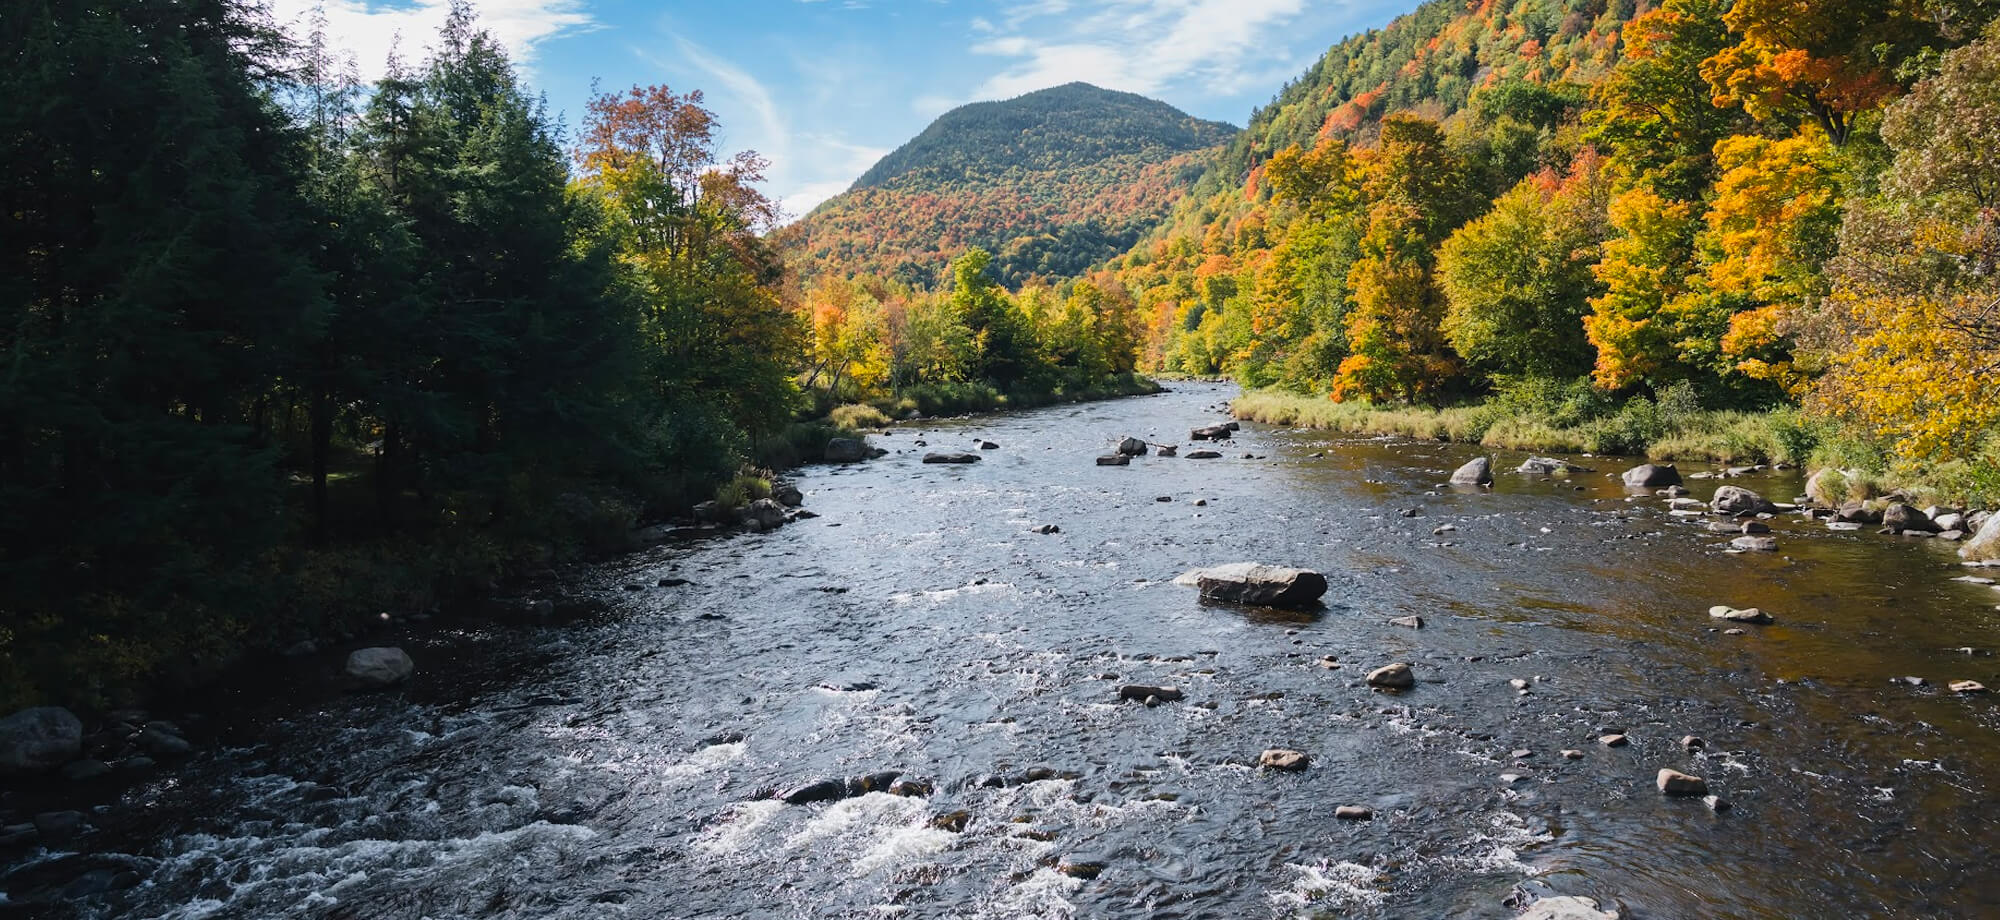 ADK Mountains with fal foliage and river in the foreground